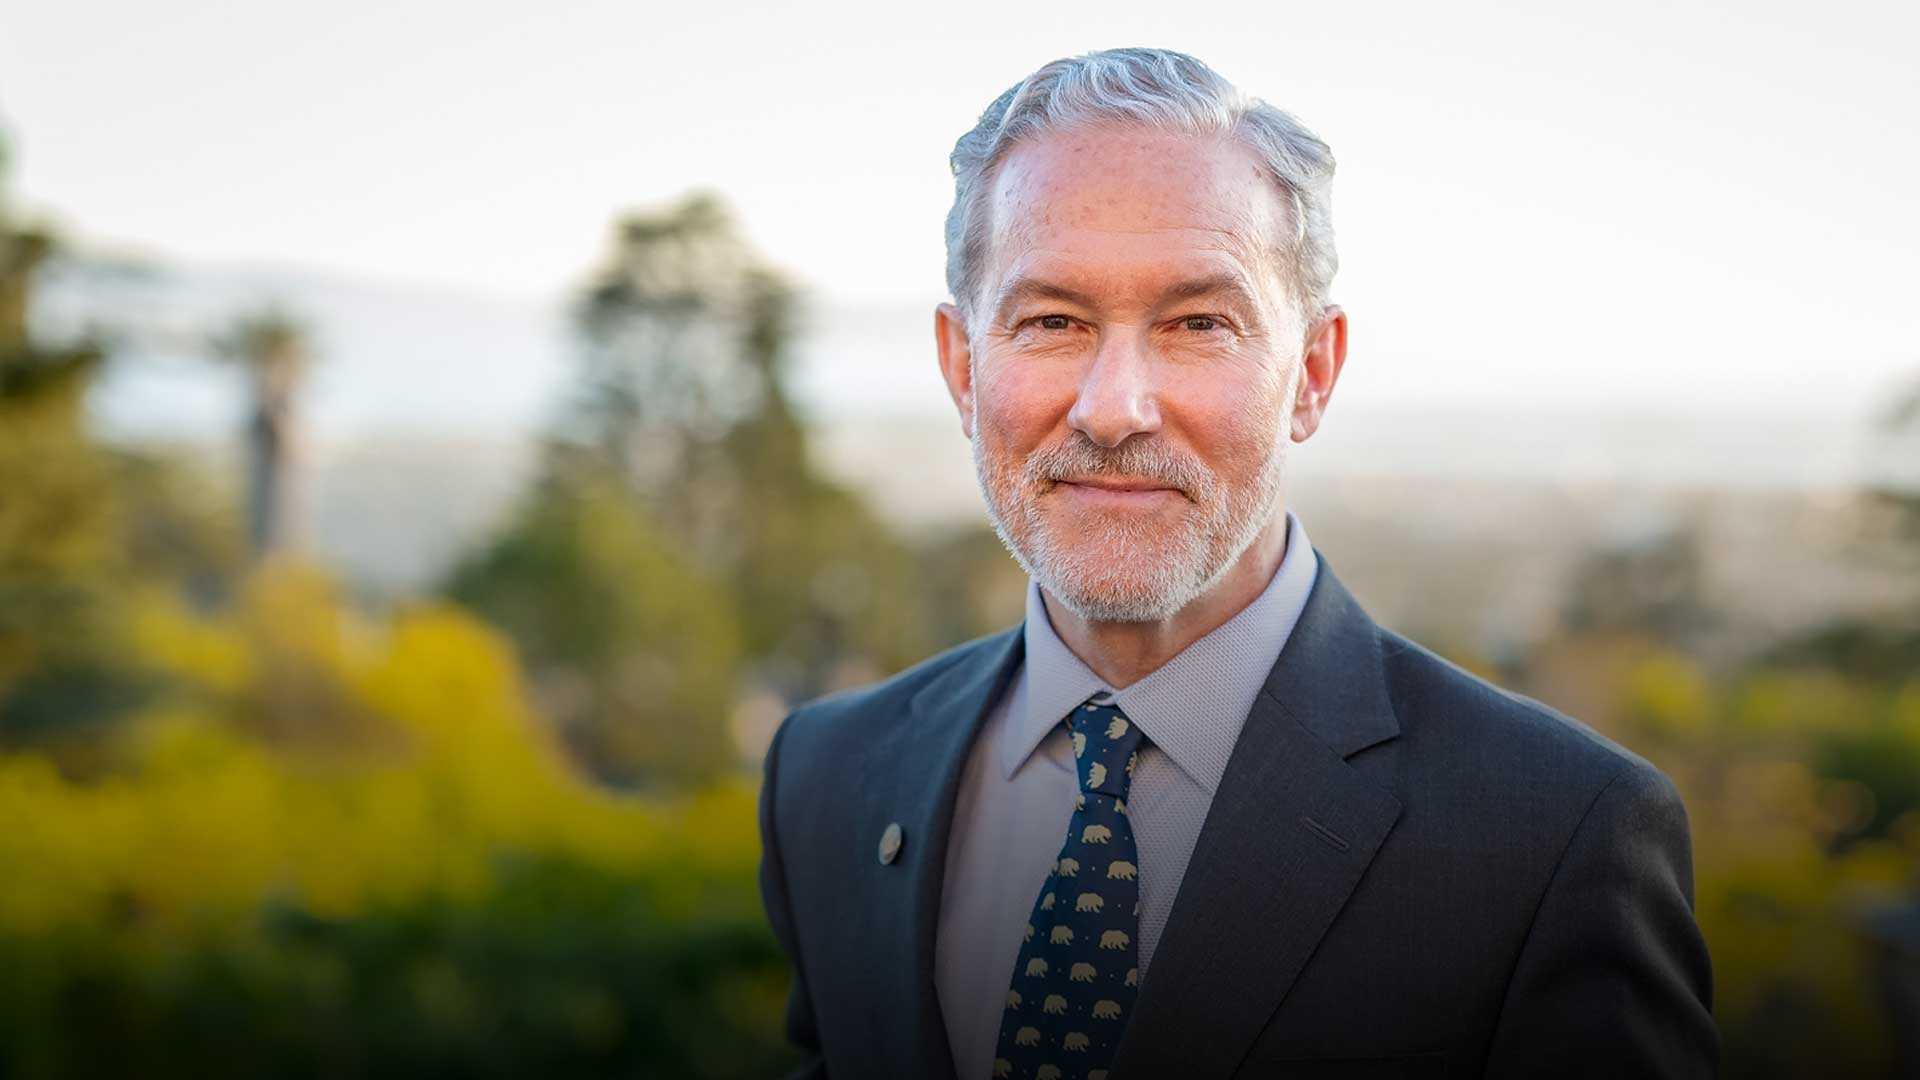 Rich Lyons, long-serving Ashesi advocate, appointed Chancellor at University of California, Berkeley